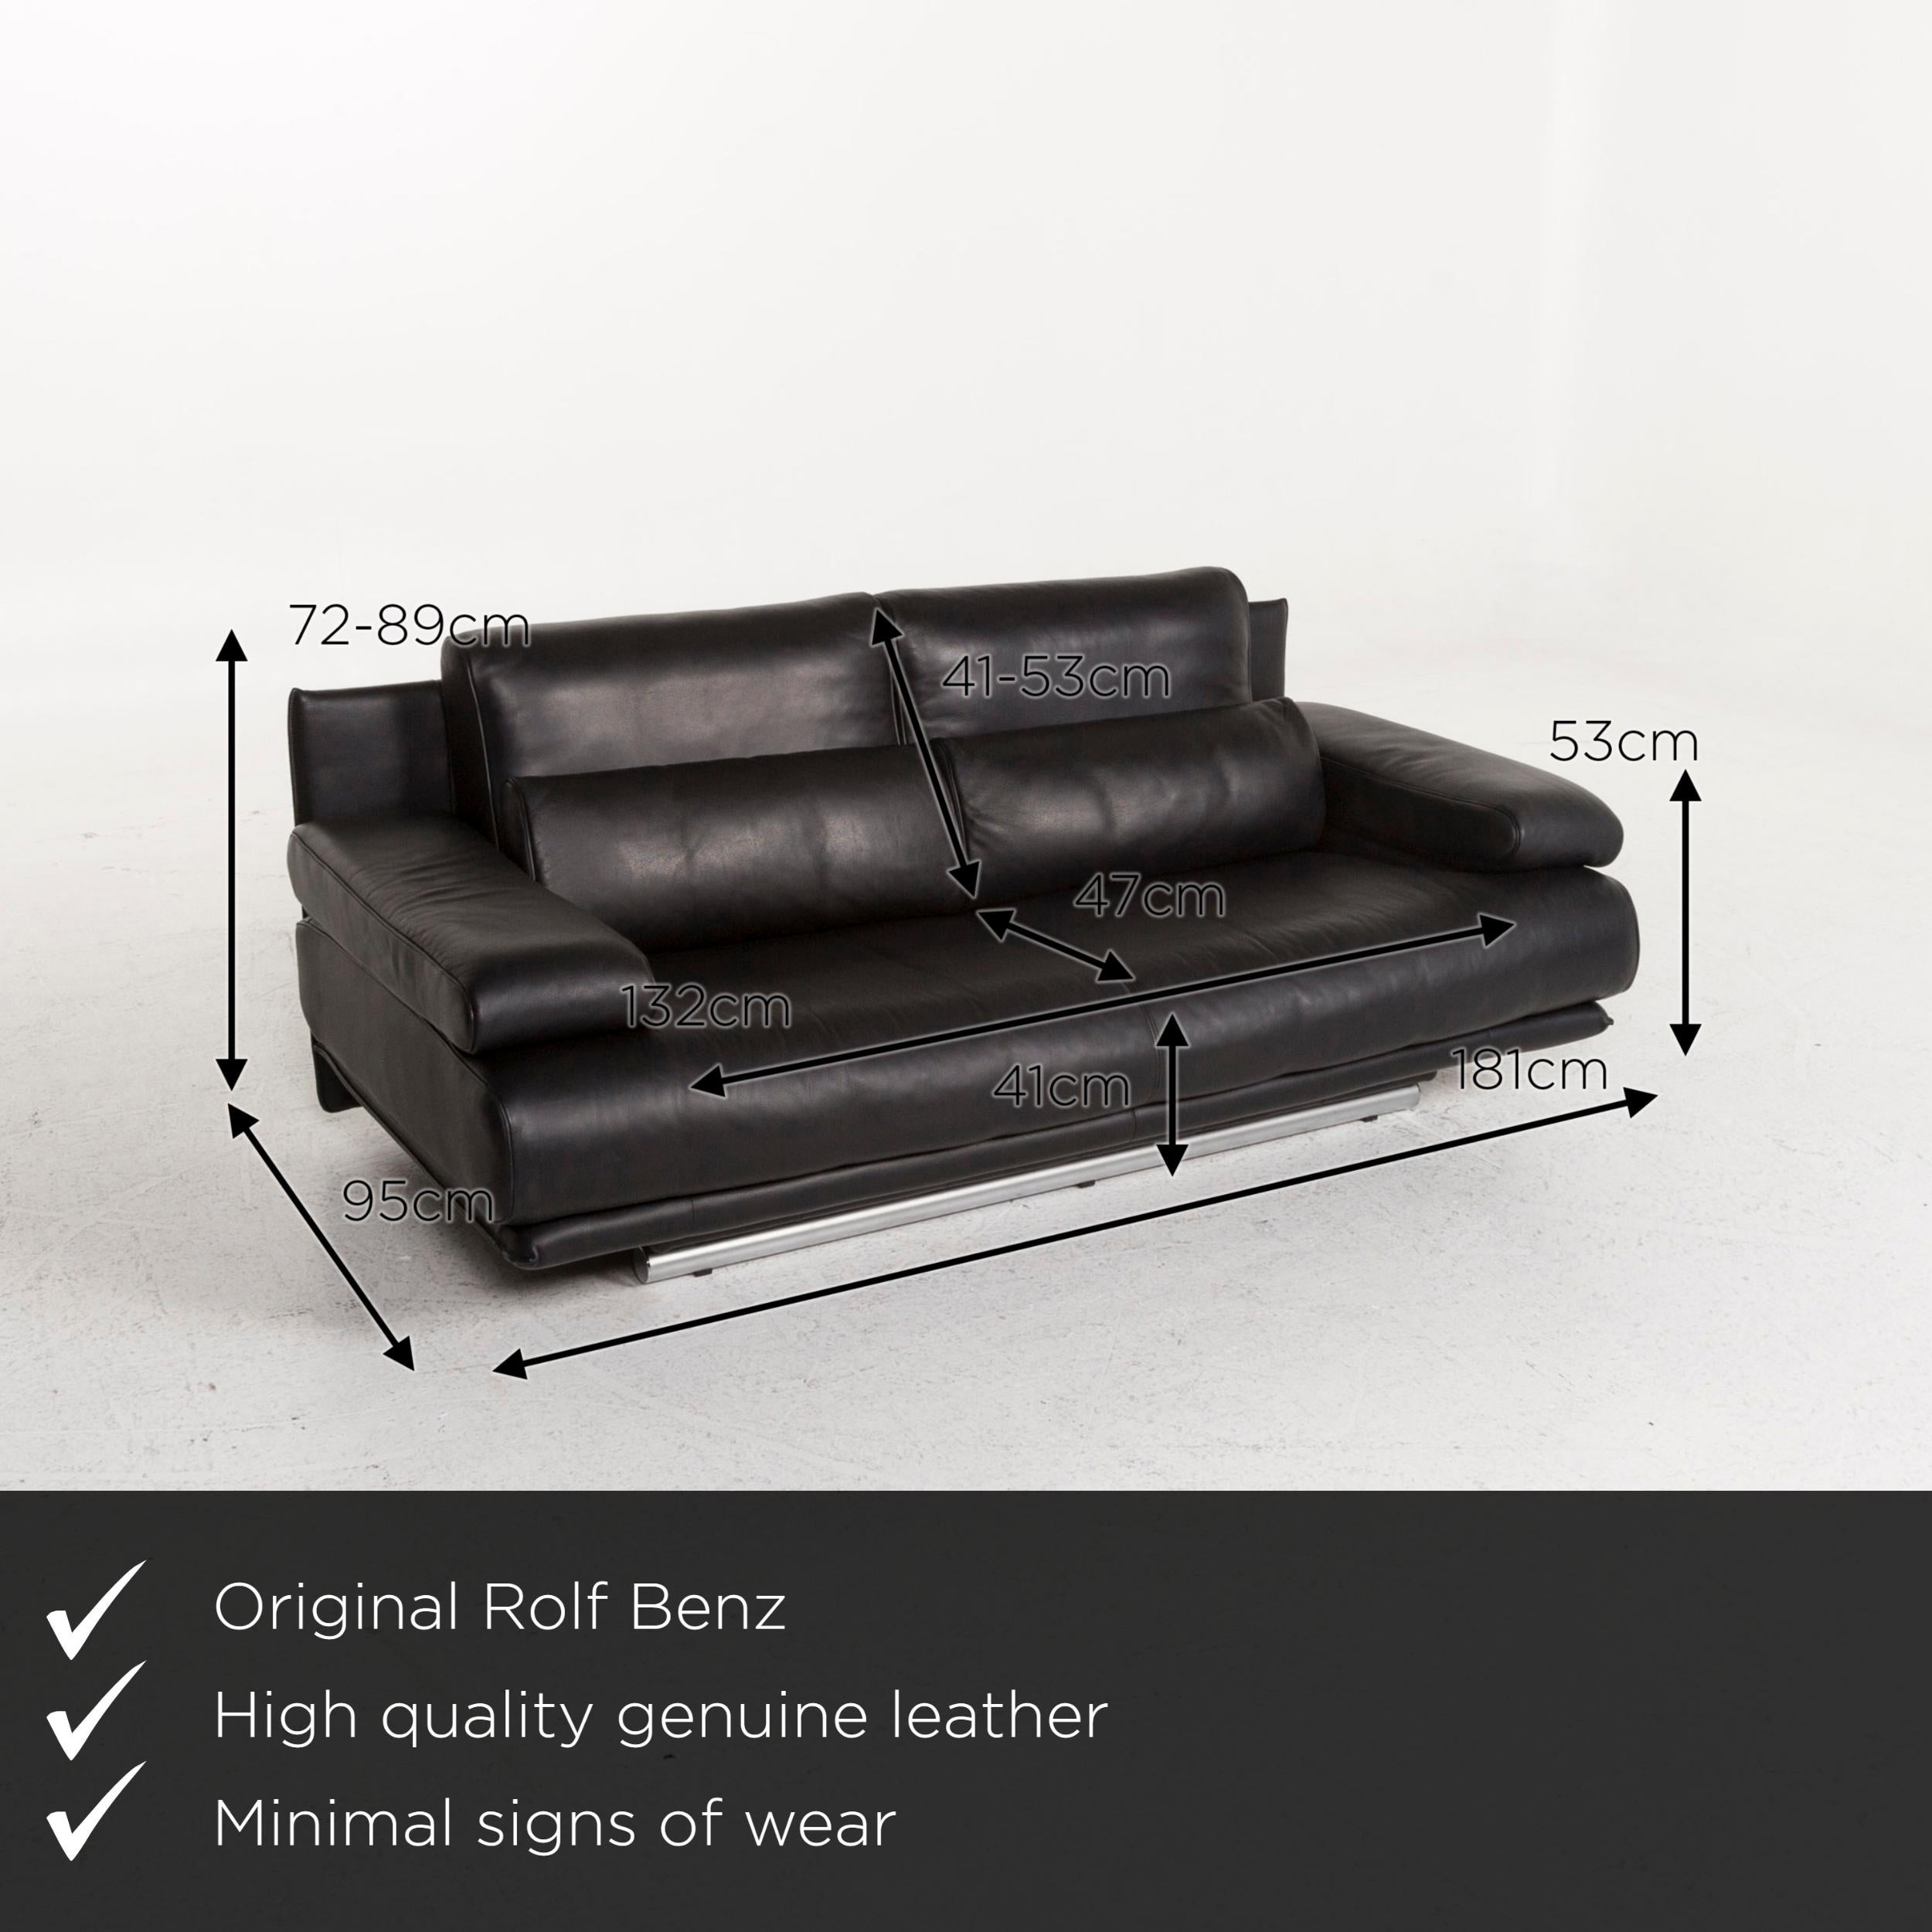 We present to you a Rolf Benz 6500 leather sofa black two-seat function couch.
   
 

 Product measurements in centimeters:
 

Depth 95
Width 181
Height 72
Seat height 41
Rest height 53
Seat depth 47
Seat width 132
Back height 41.